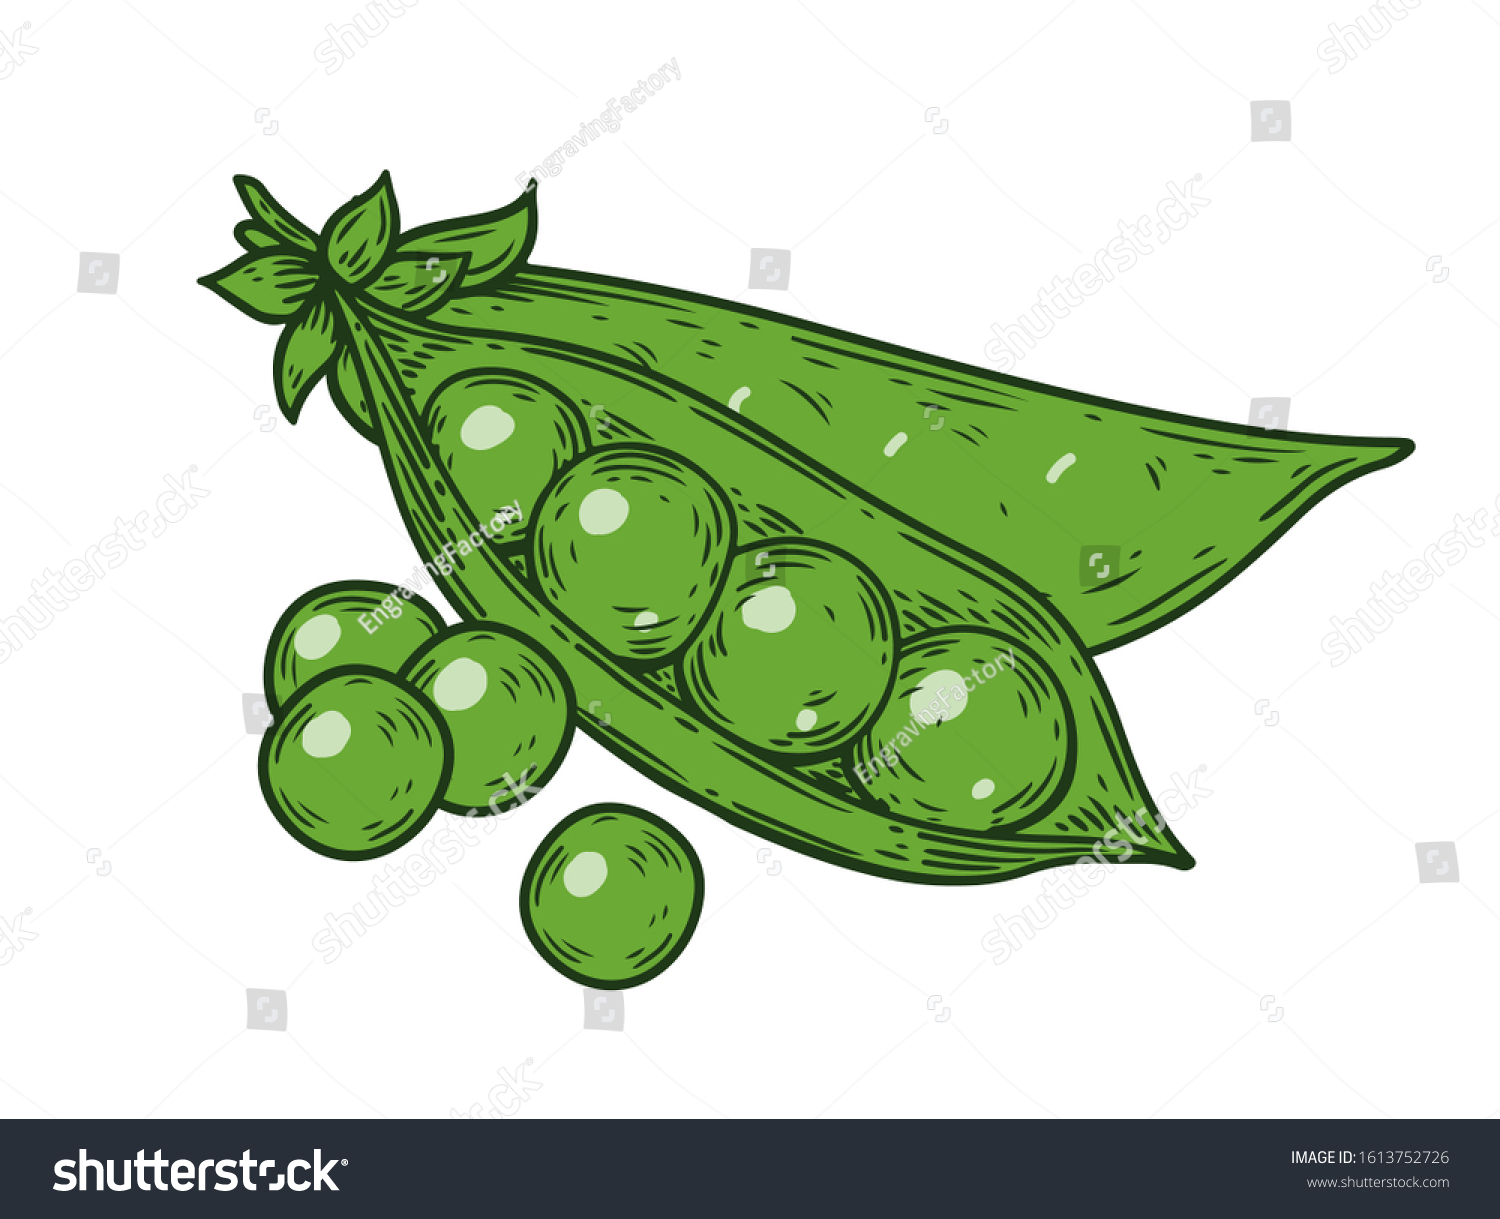 Green Peas. Hand drawn colorful pea illustration. Organic fresh farm food engraving peas isolated on white background. Hand drawn peas in sketch etch style #1613752726